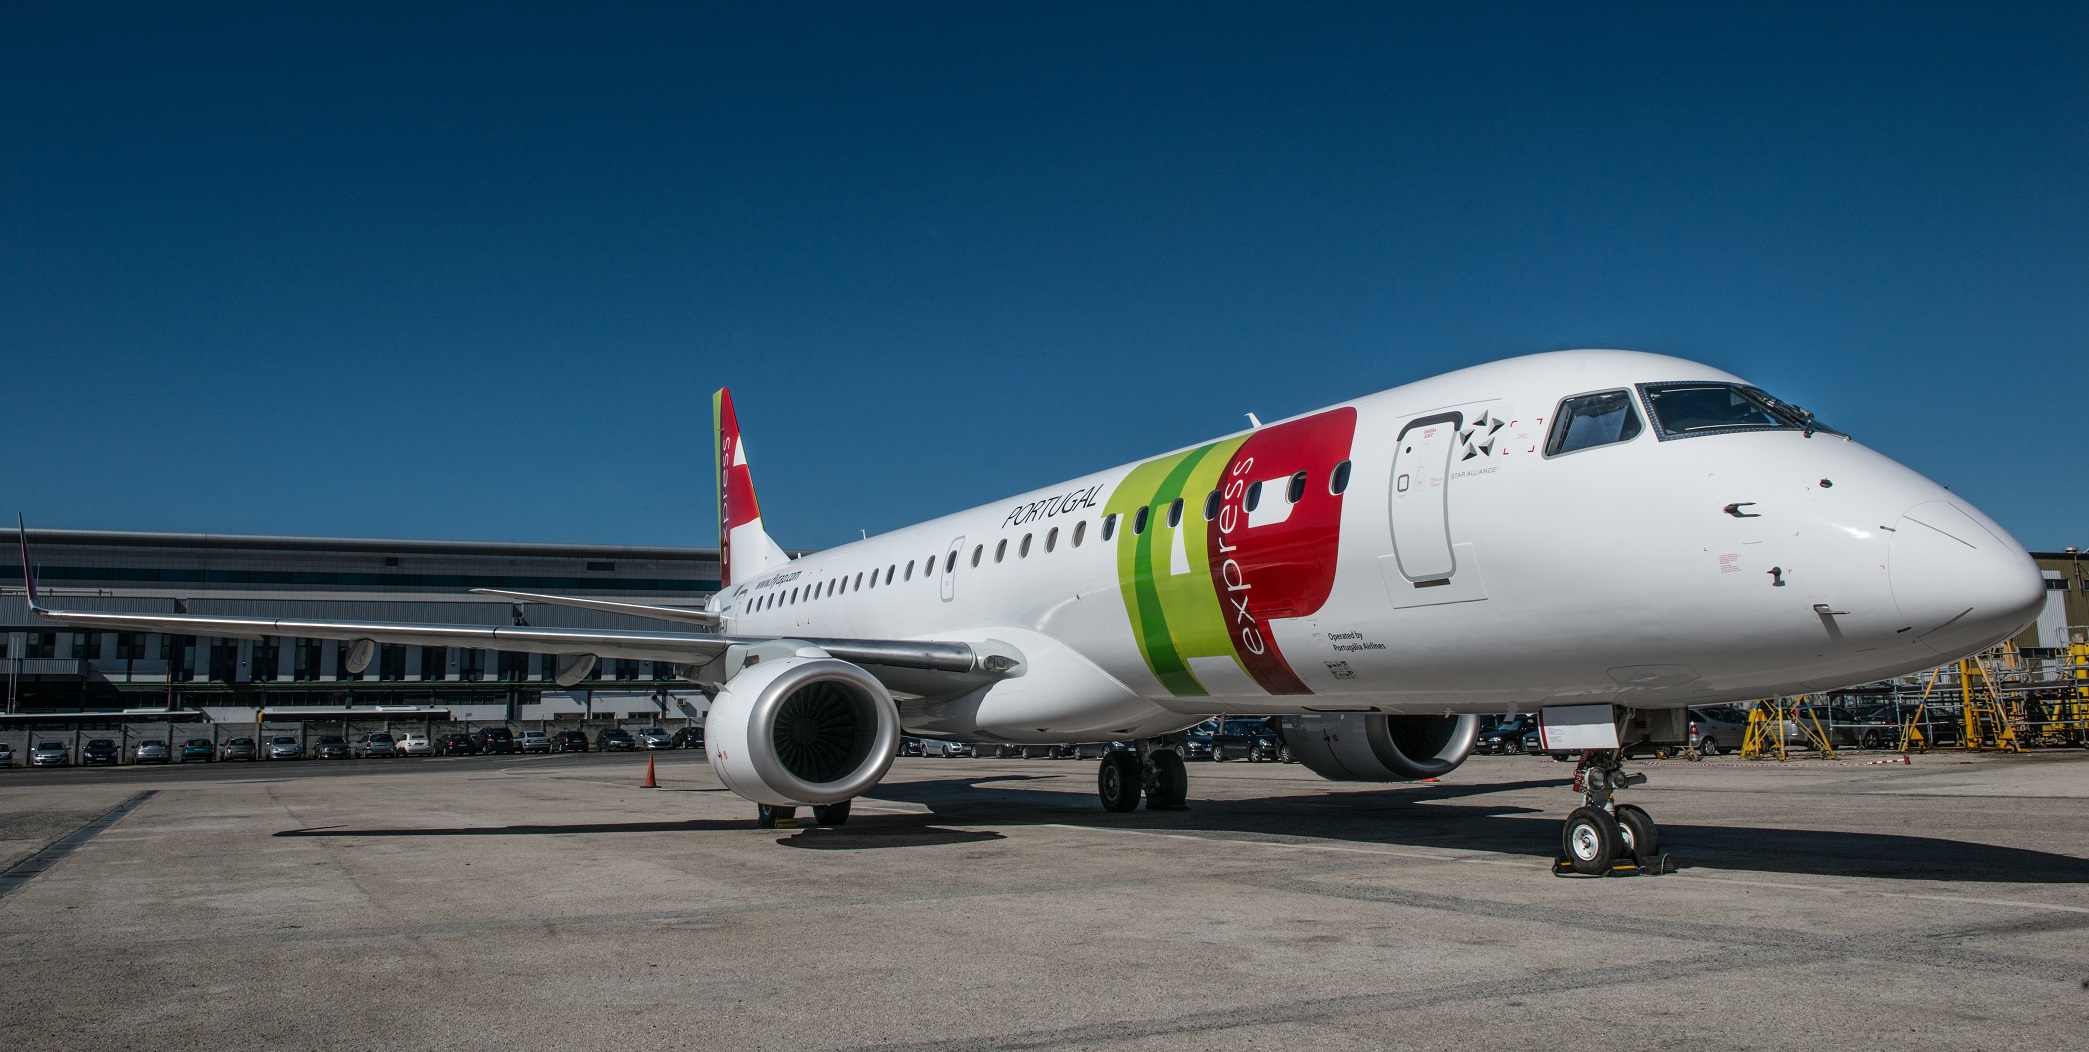 TAP becomes the newest airline to operate Embraer’s E-Jets in Europe 